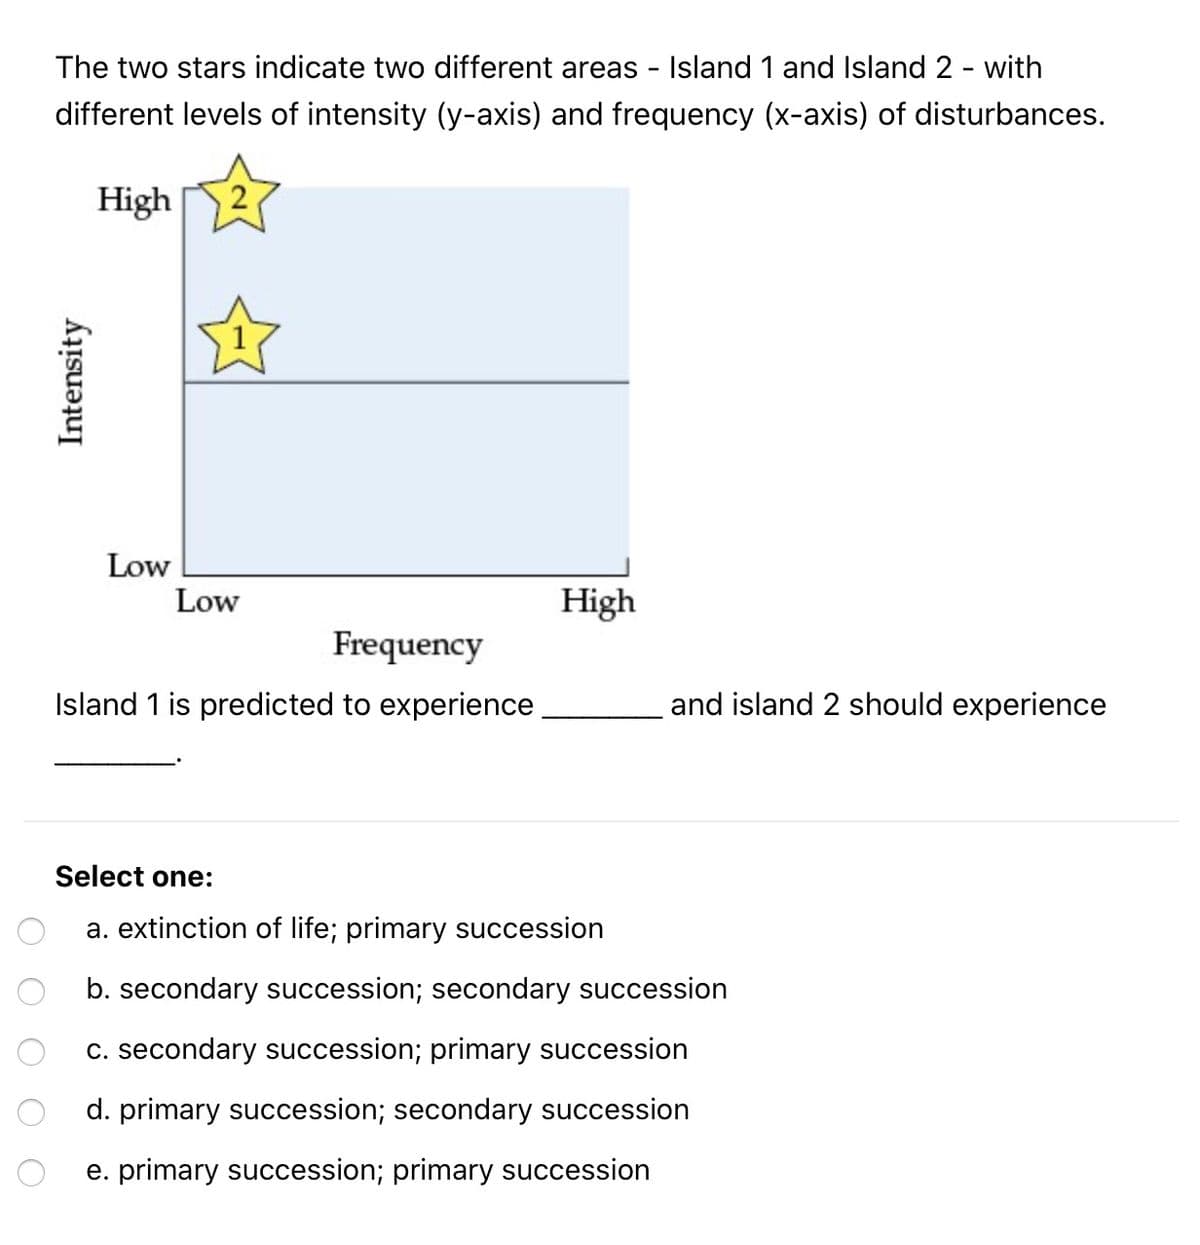 The two stars indicate two different areas - Island 1 and Island 2 - with
different levels of intensity (y-axis) and frequency (x-axis) of disturbances.
High
Low
Low
High
Frequency
Island 1 is predicted to experience
and island 2 should experience
Select one:
a. extinction of life; primary succession
b. secondary succession; secondary succession
c. secondary succession; primary succession
d. primary succession; secondary succession
e. primary succession; primary succession
Intensity
